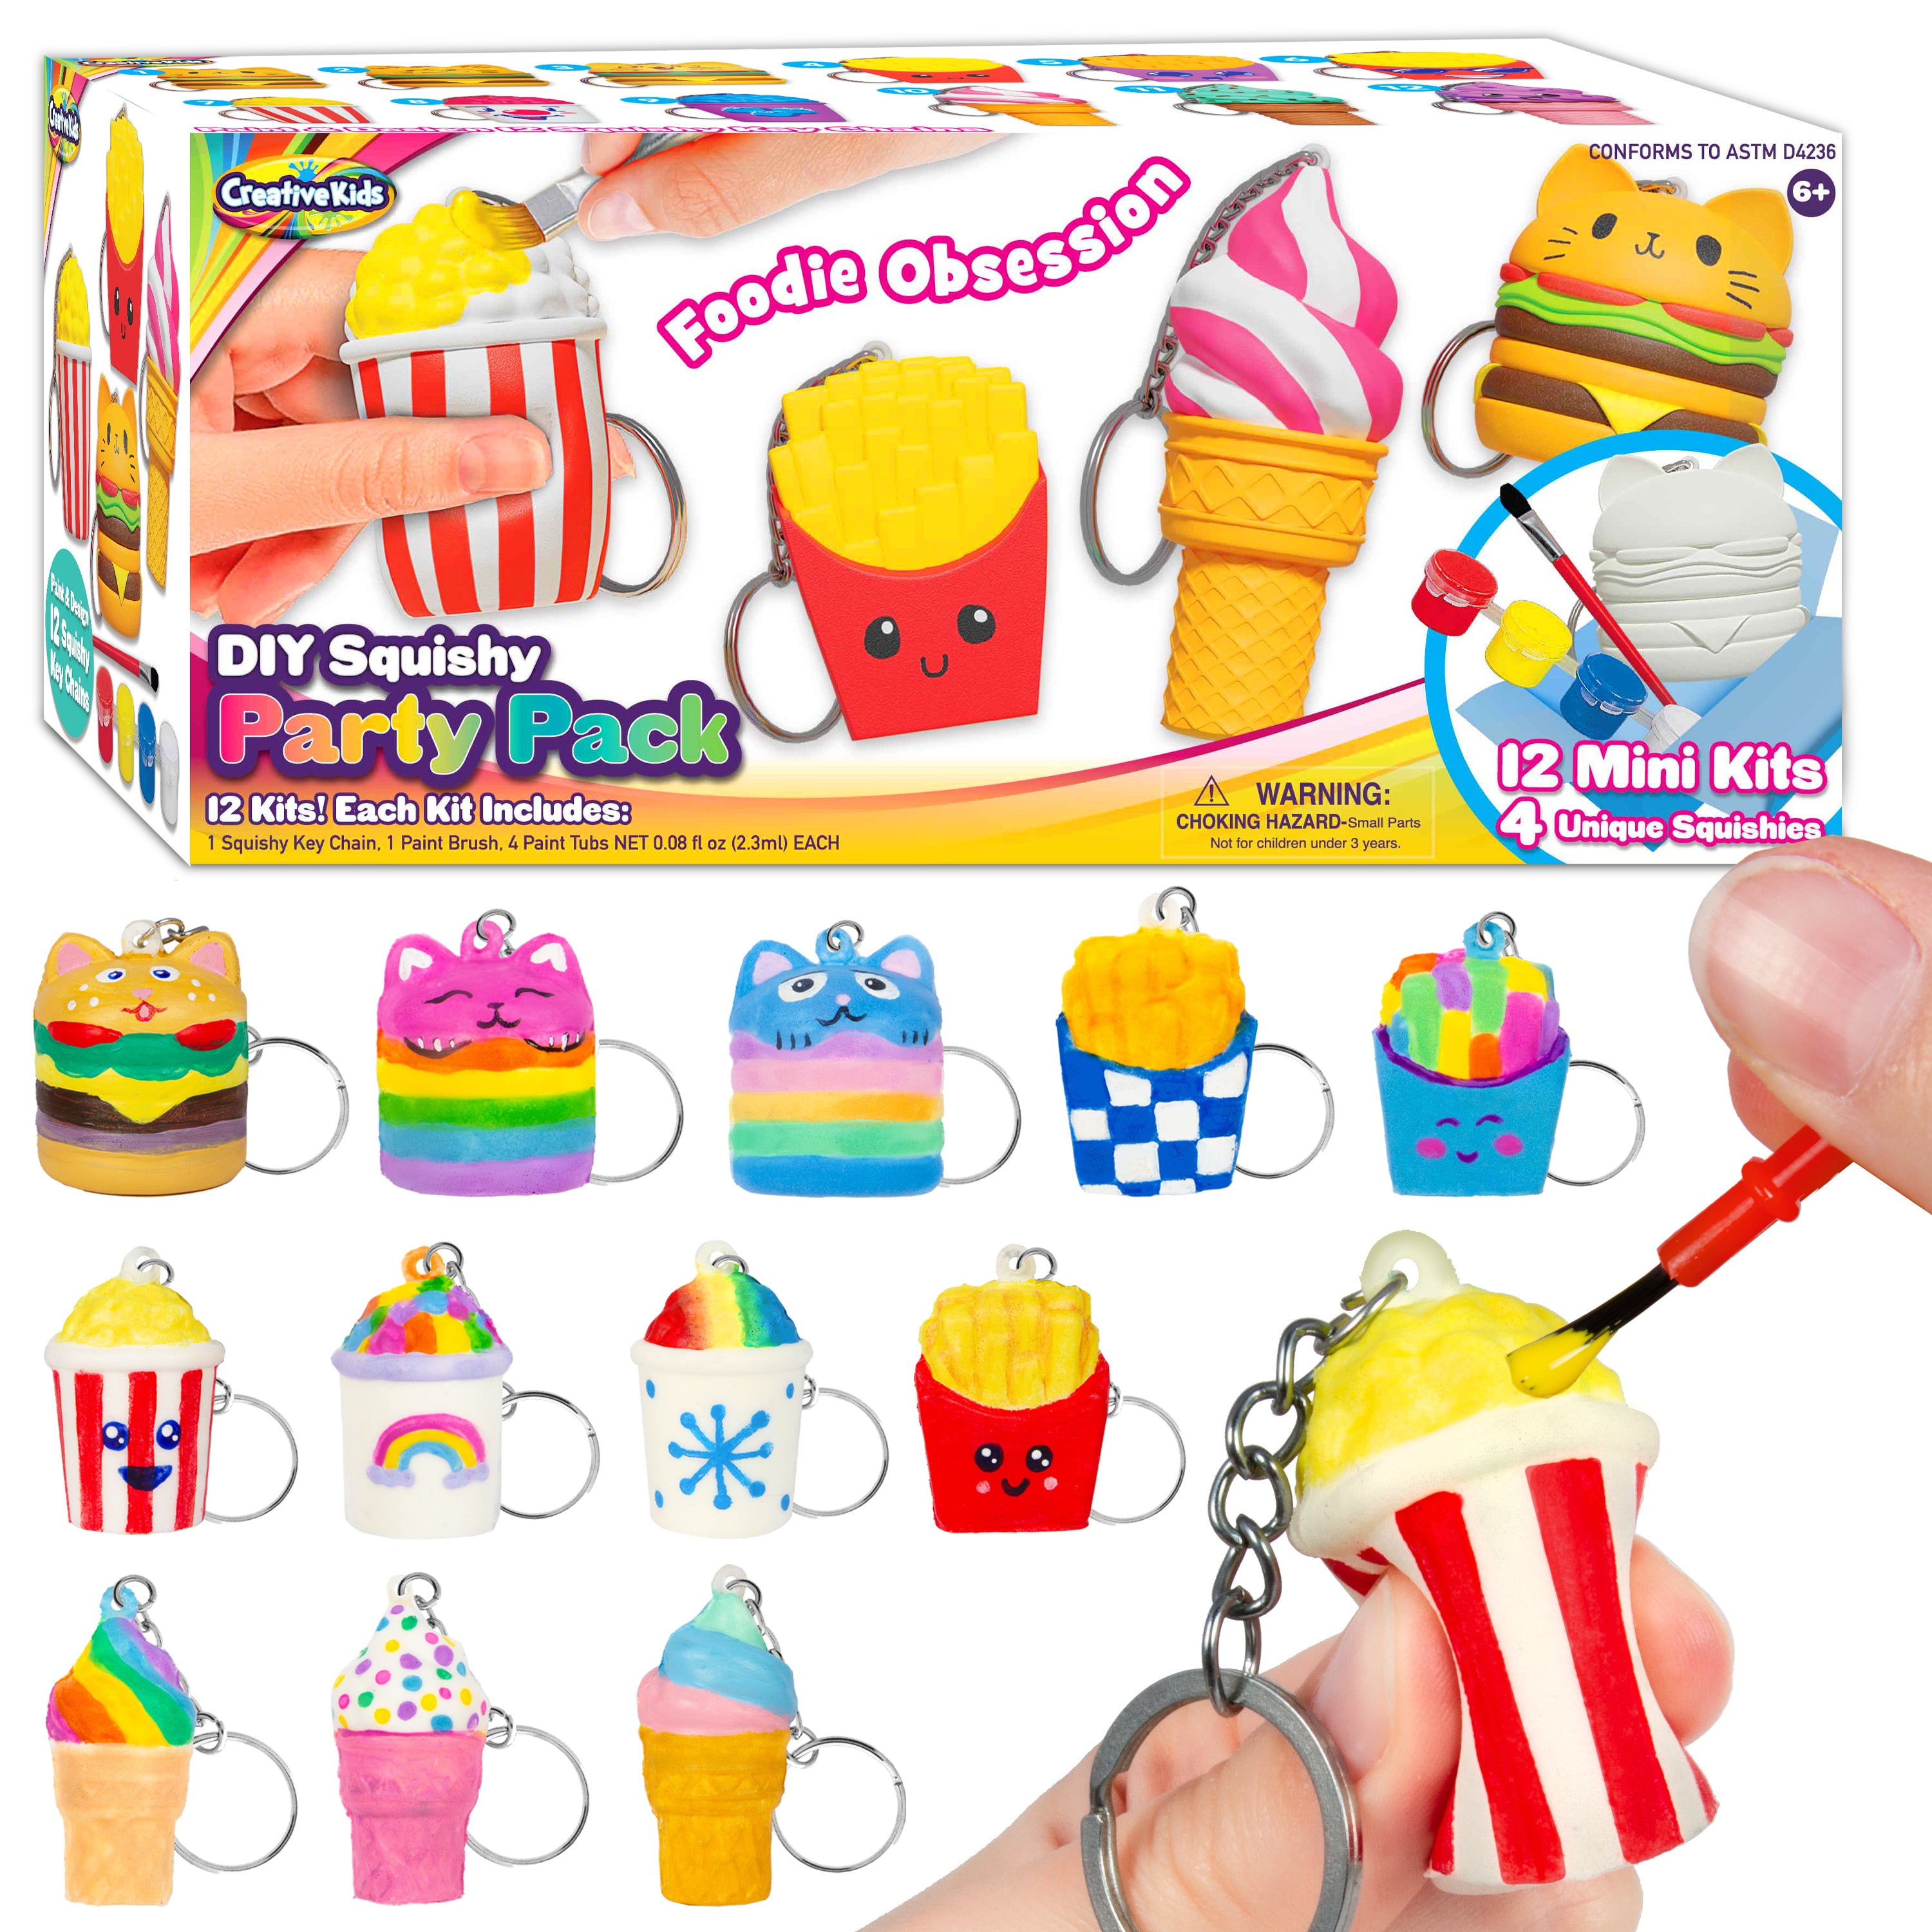 DIY Paint Your Own Squishy Kit Super Squishy Studio by Creative